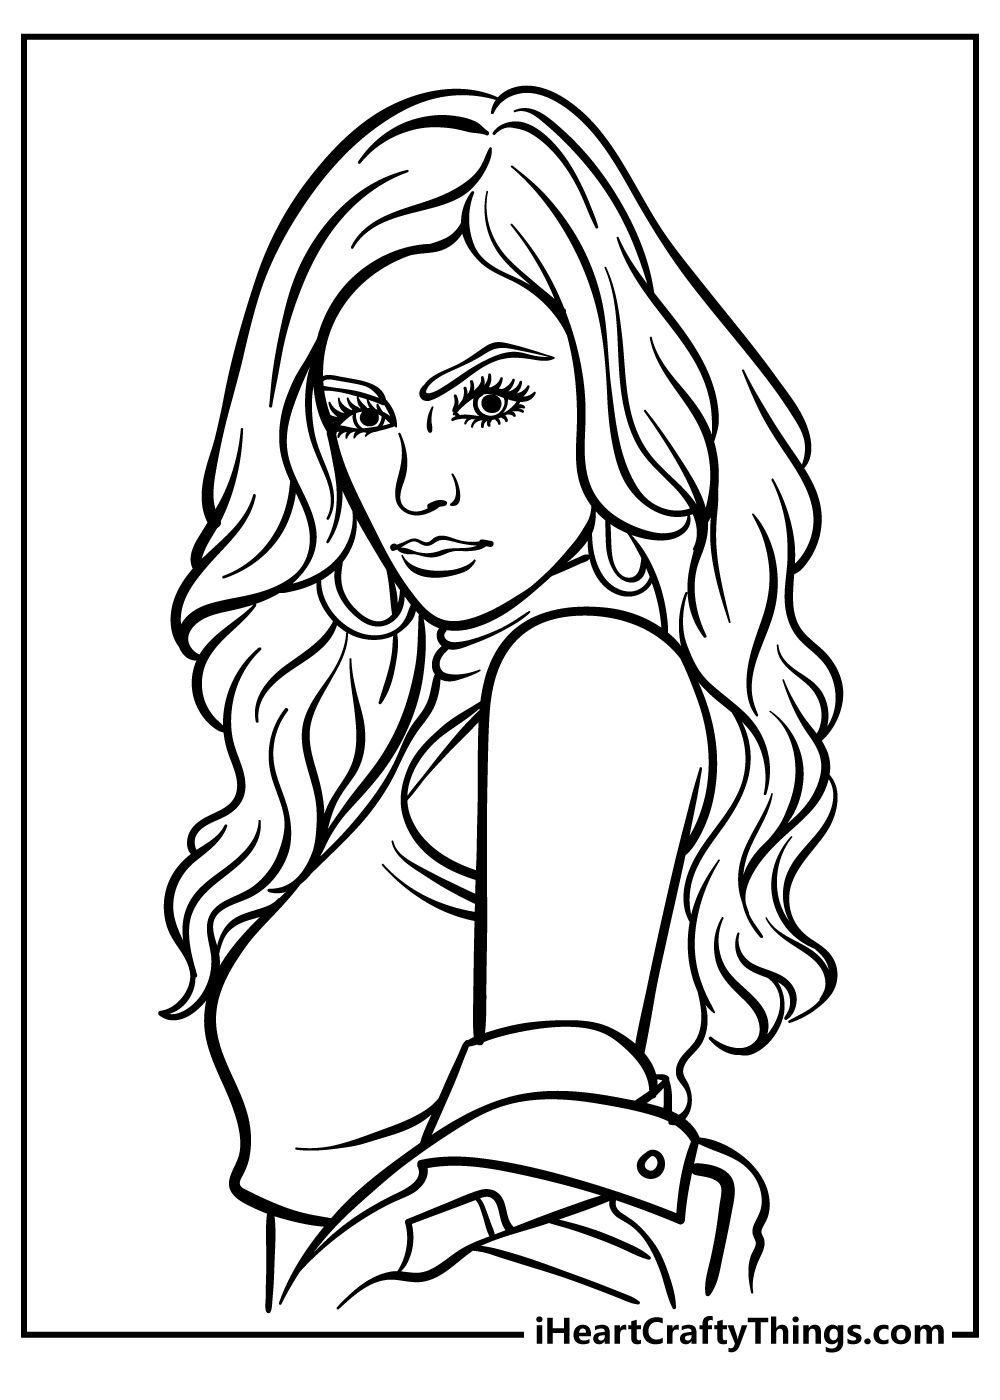 Coloring pages for teens coloring pages for girls people coloring pages cute coloring pages